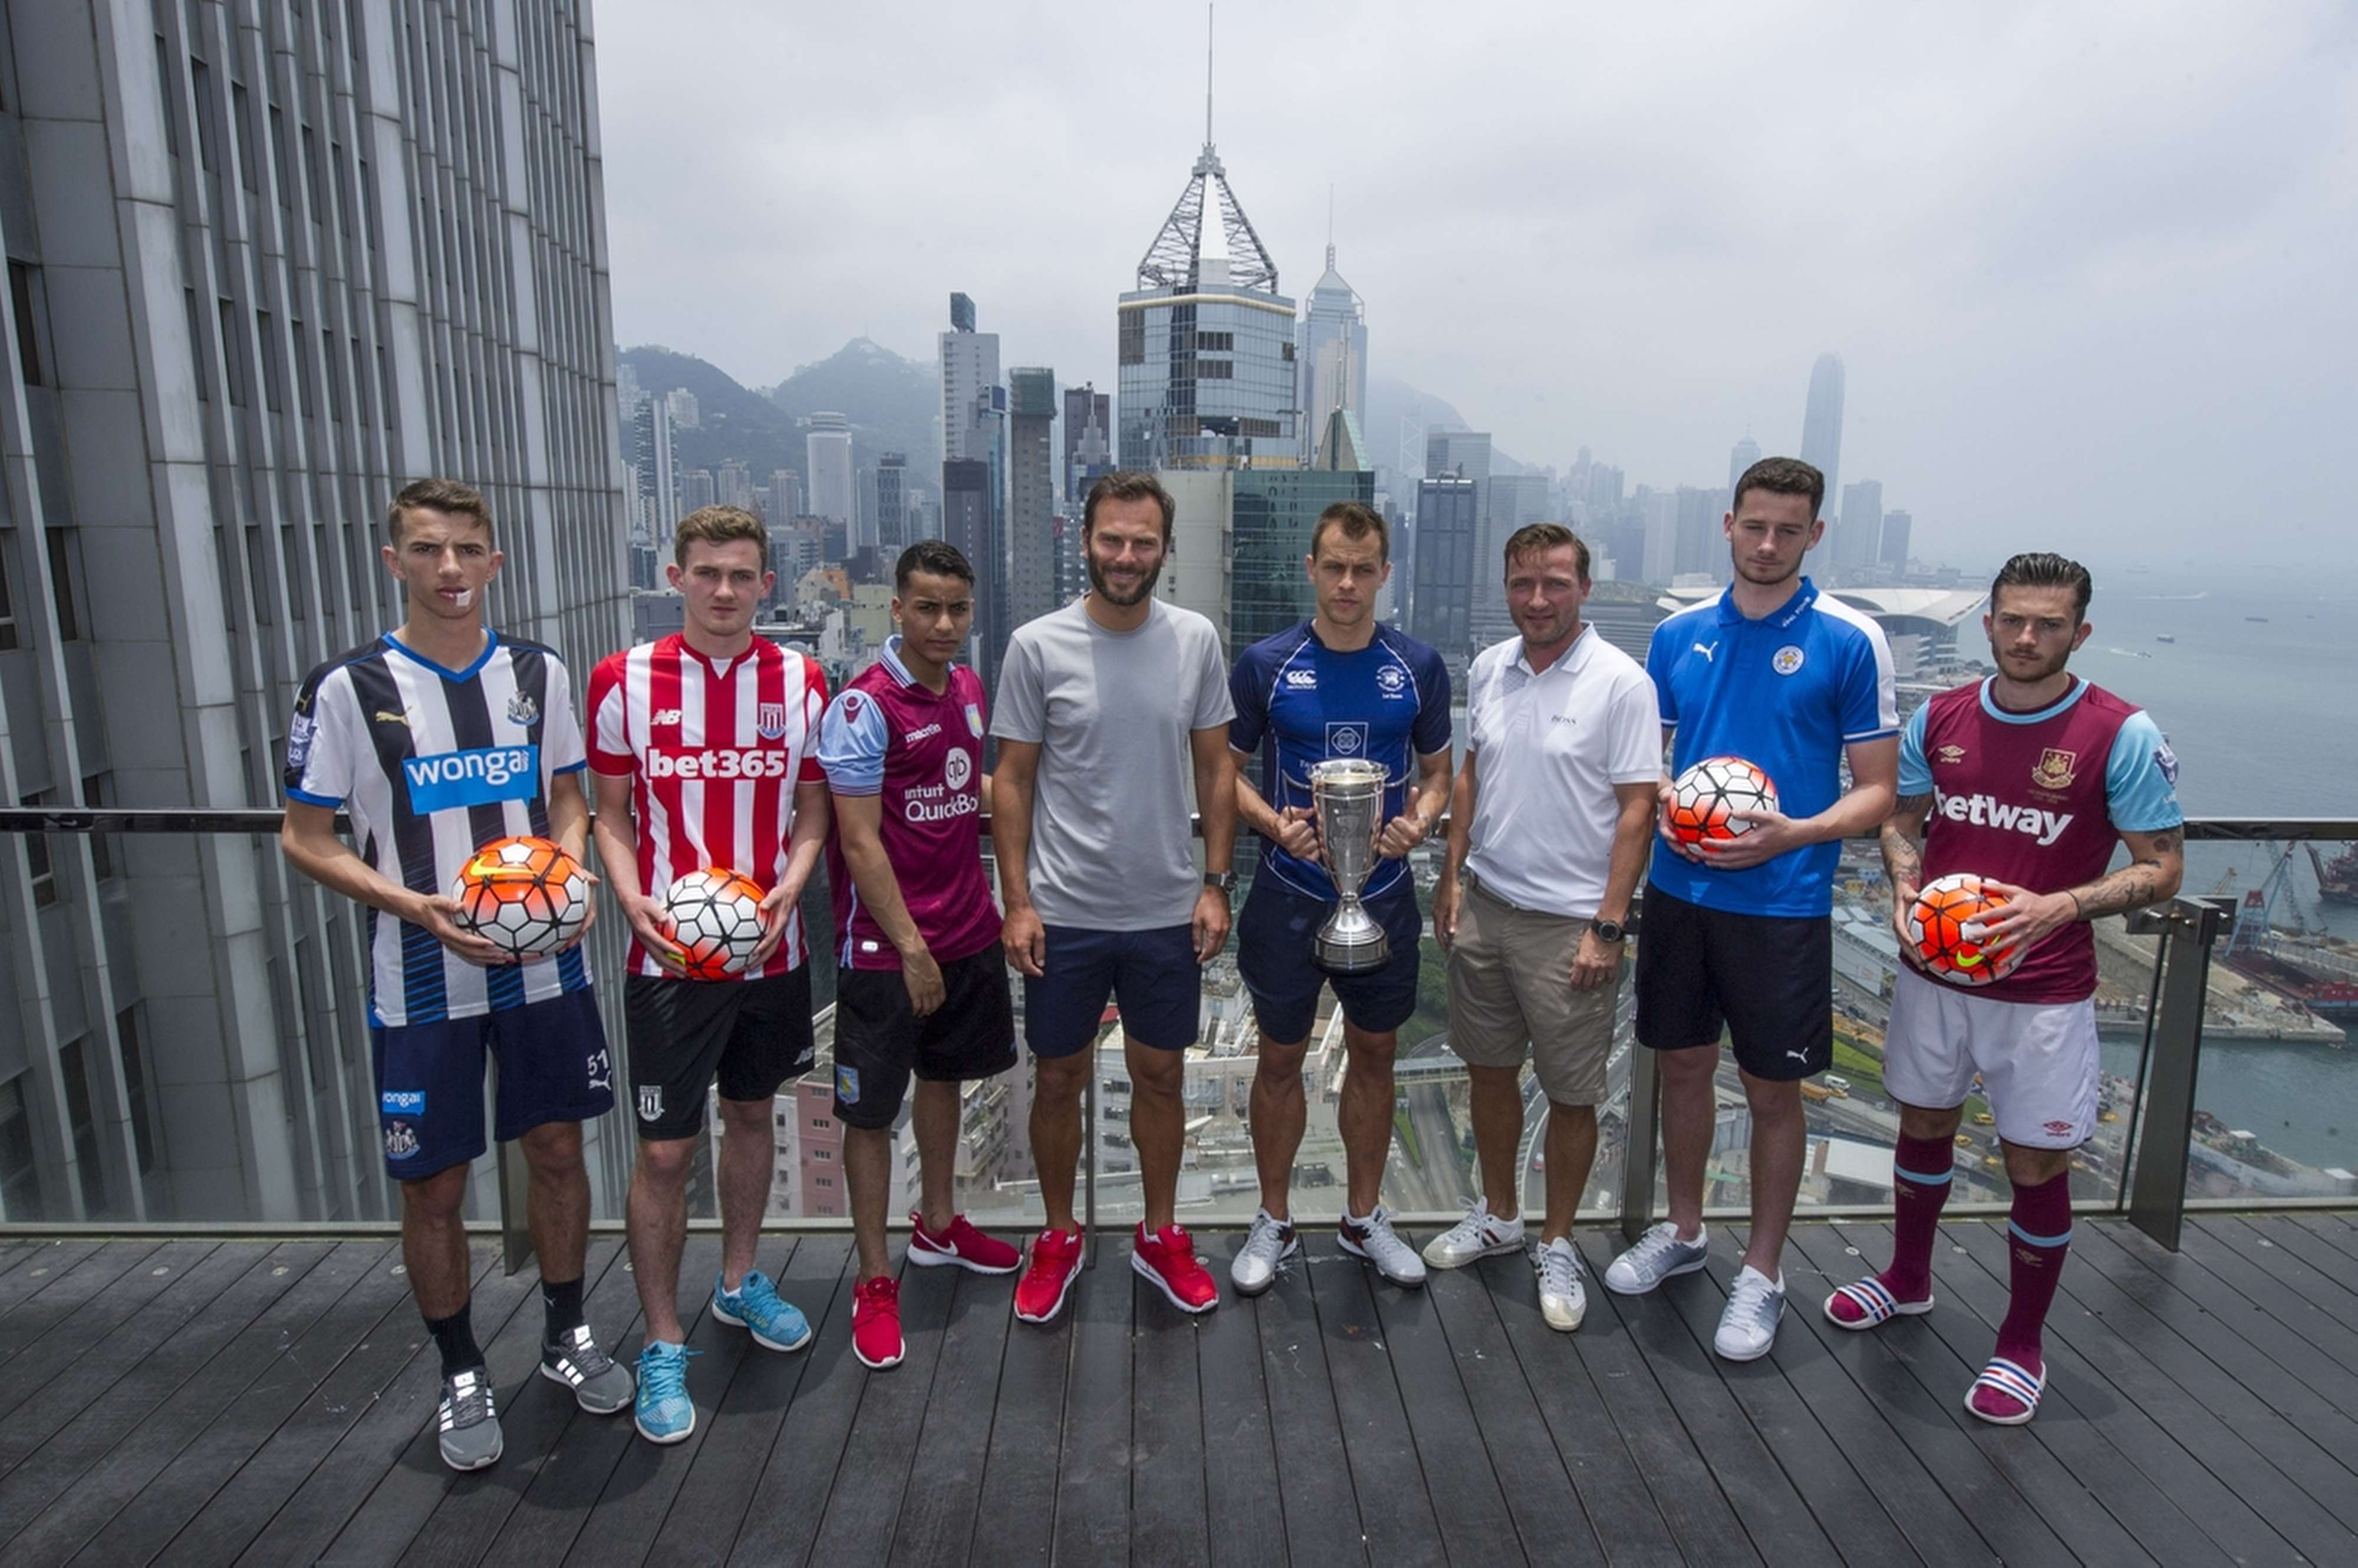 From left to right: Newcastle United’s Dan Barlaser, Stoke City’s Lewis Banks, Aston Villa’s Khalid Abdo, Citi All Stars’ Patrik Berger, Football Club’s Gary Gheczy, Citi All Stars’ Vladimir Smicer, Leicester City’s Elliott Moore and West Ham United’s Lewis Page. Photos: Lucas Schifres/Power Sport Images